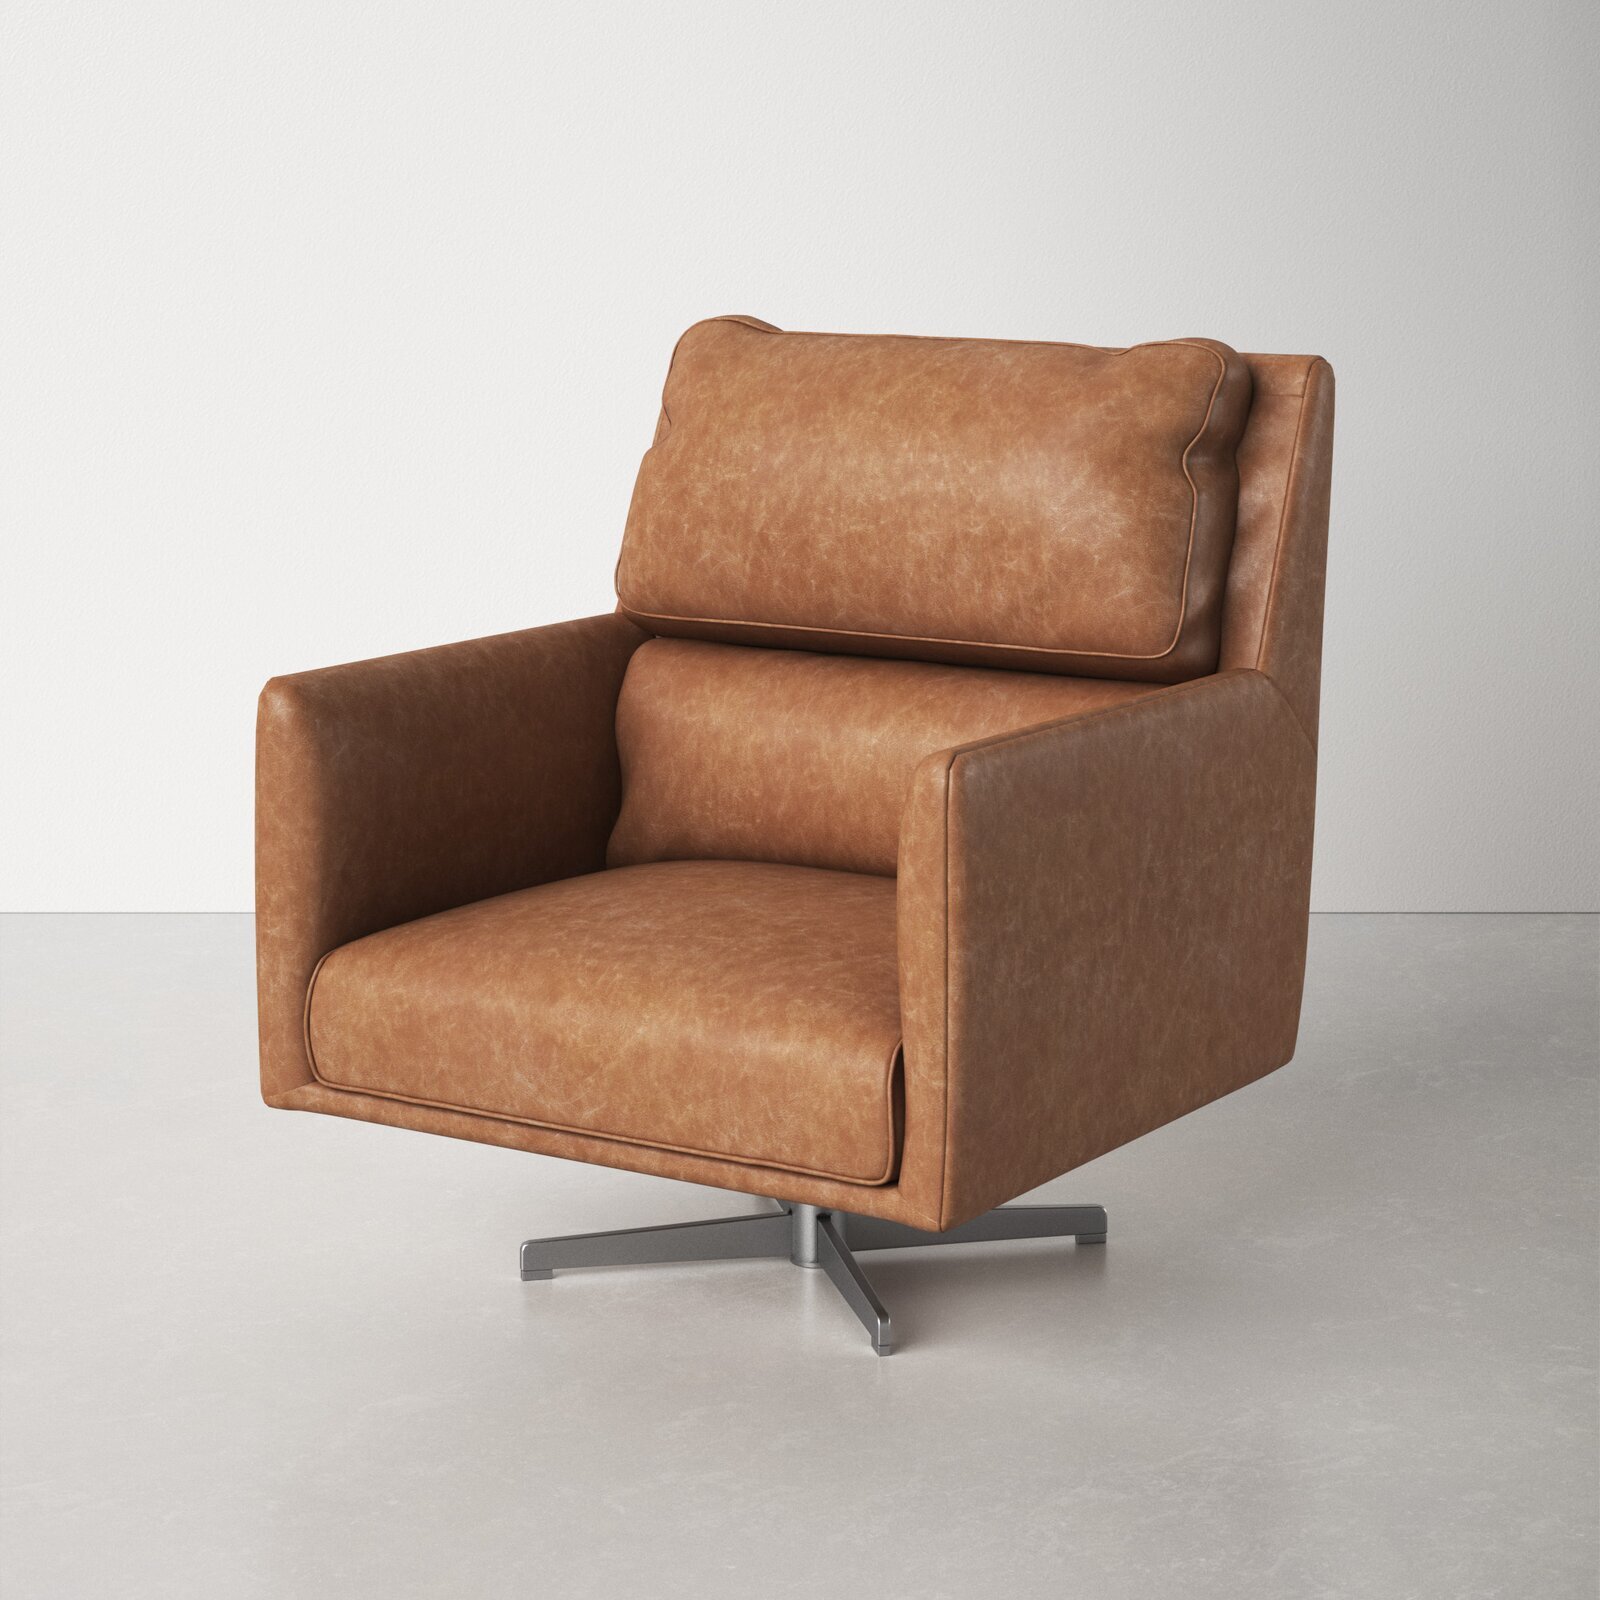 The wide swivel chair with a luxurious leather headrest